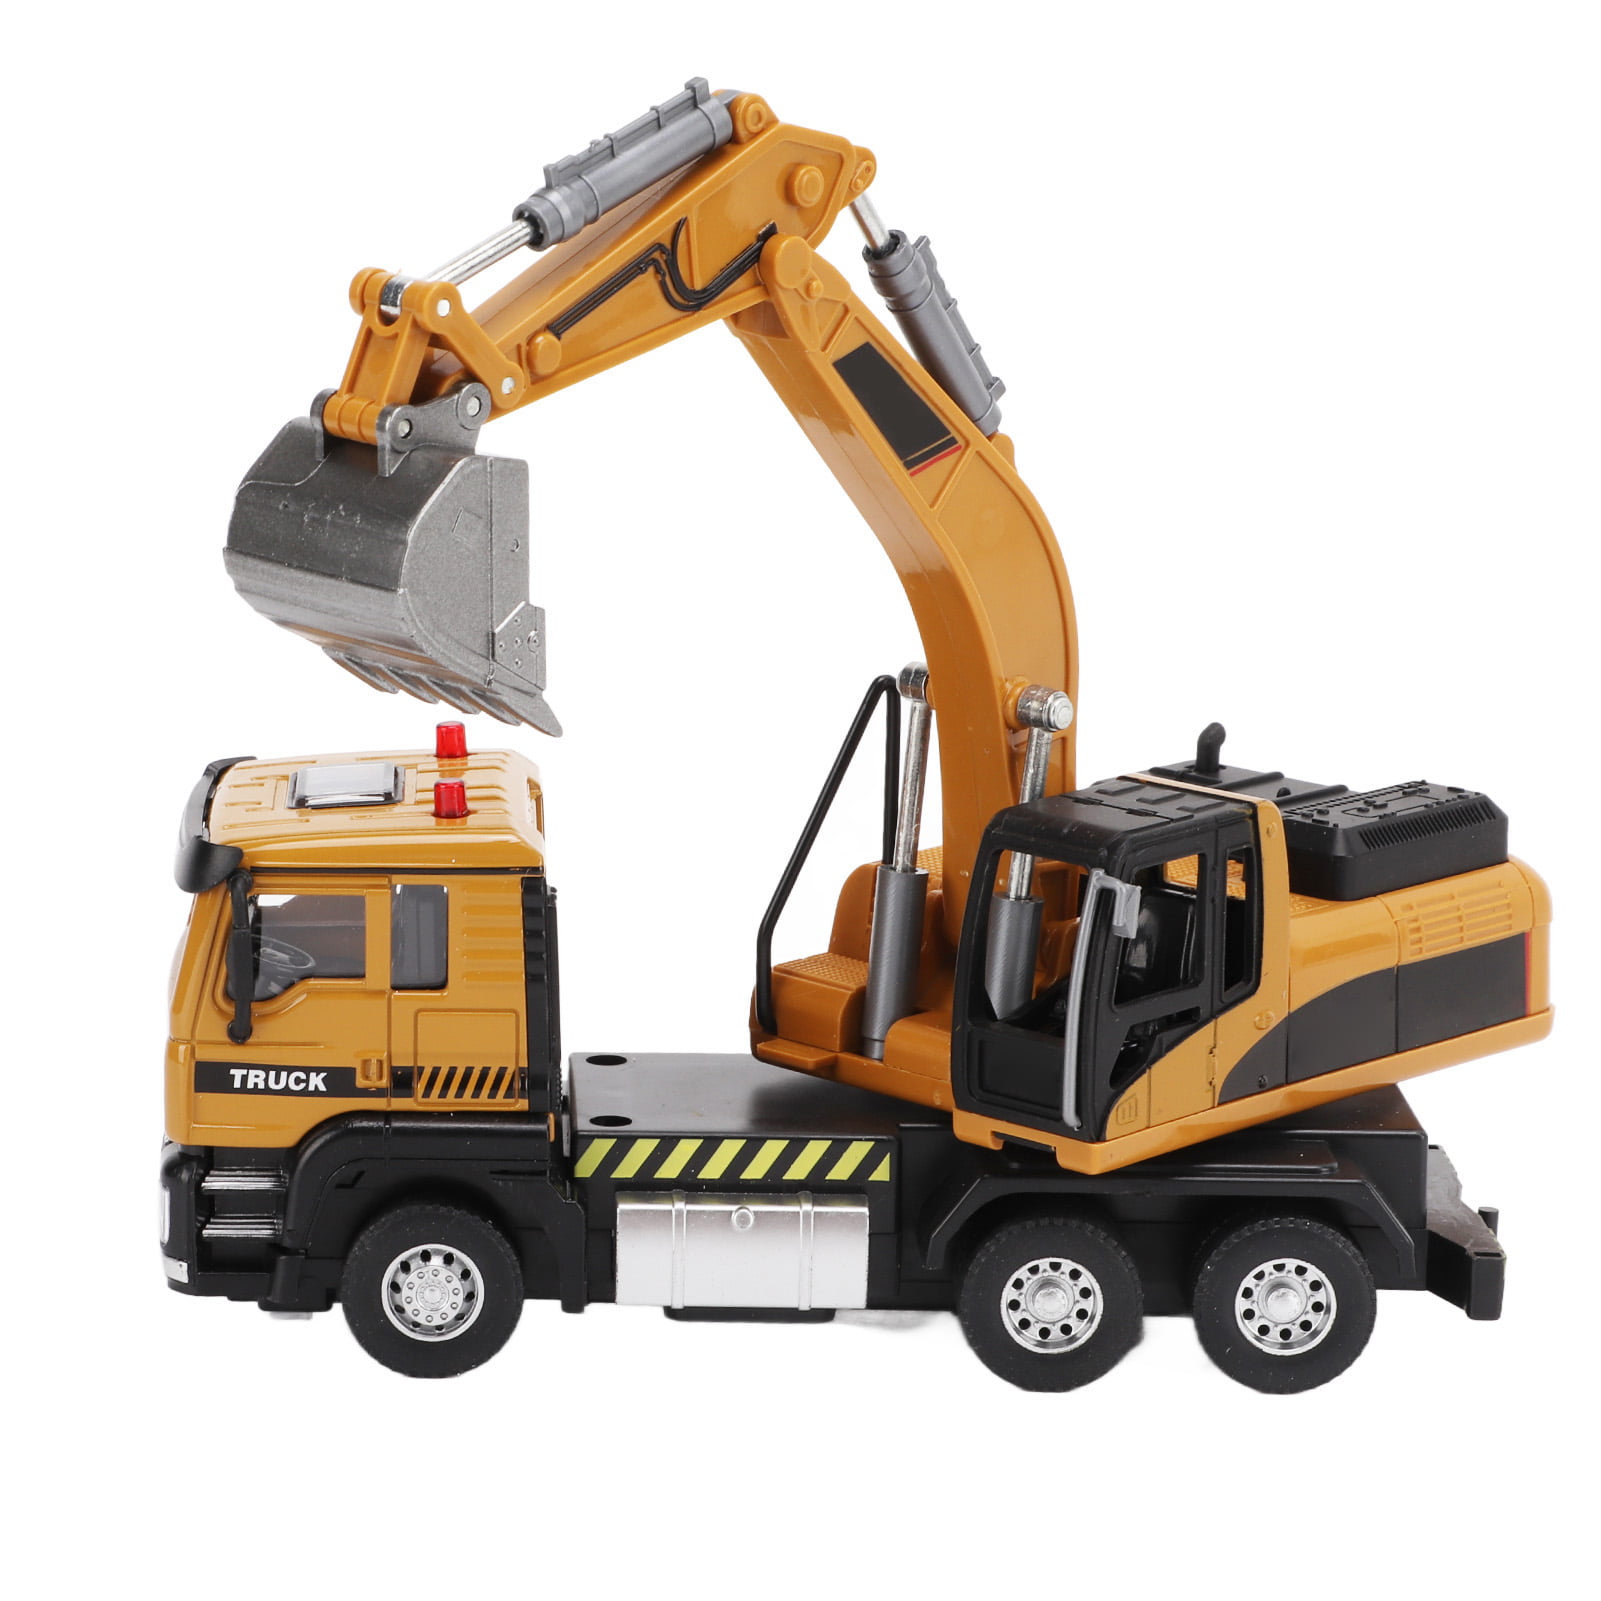 Kids Toddlers 5 Year Olds Dioche Electronic Engineering Vehicle Boys Excavator Remote Control Truck with 2.4GHz Frequency 4 Excavator RC Toy for 3 